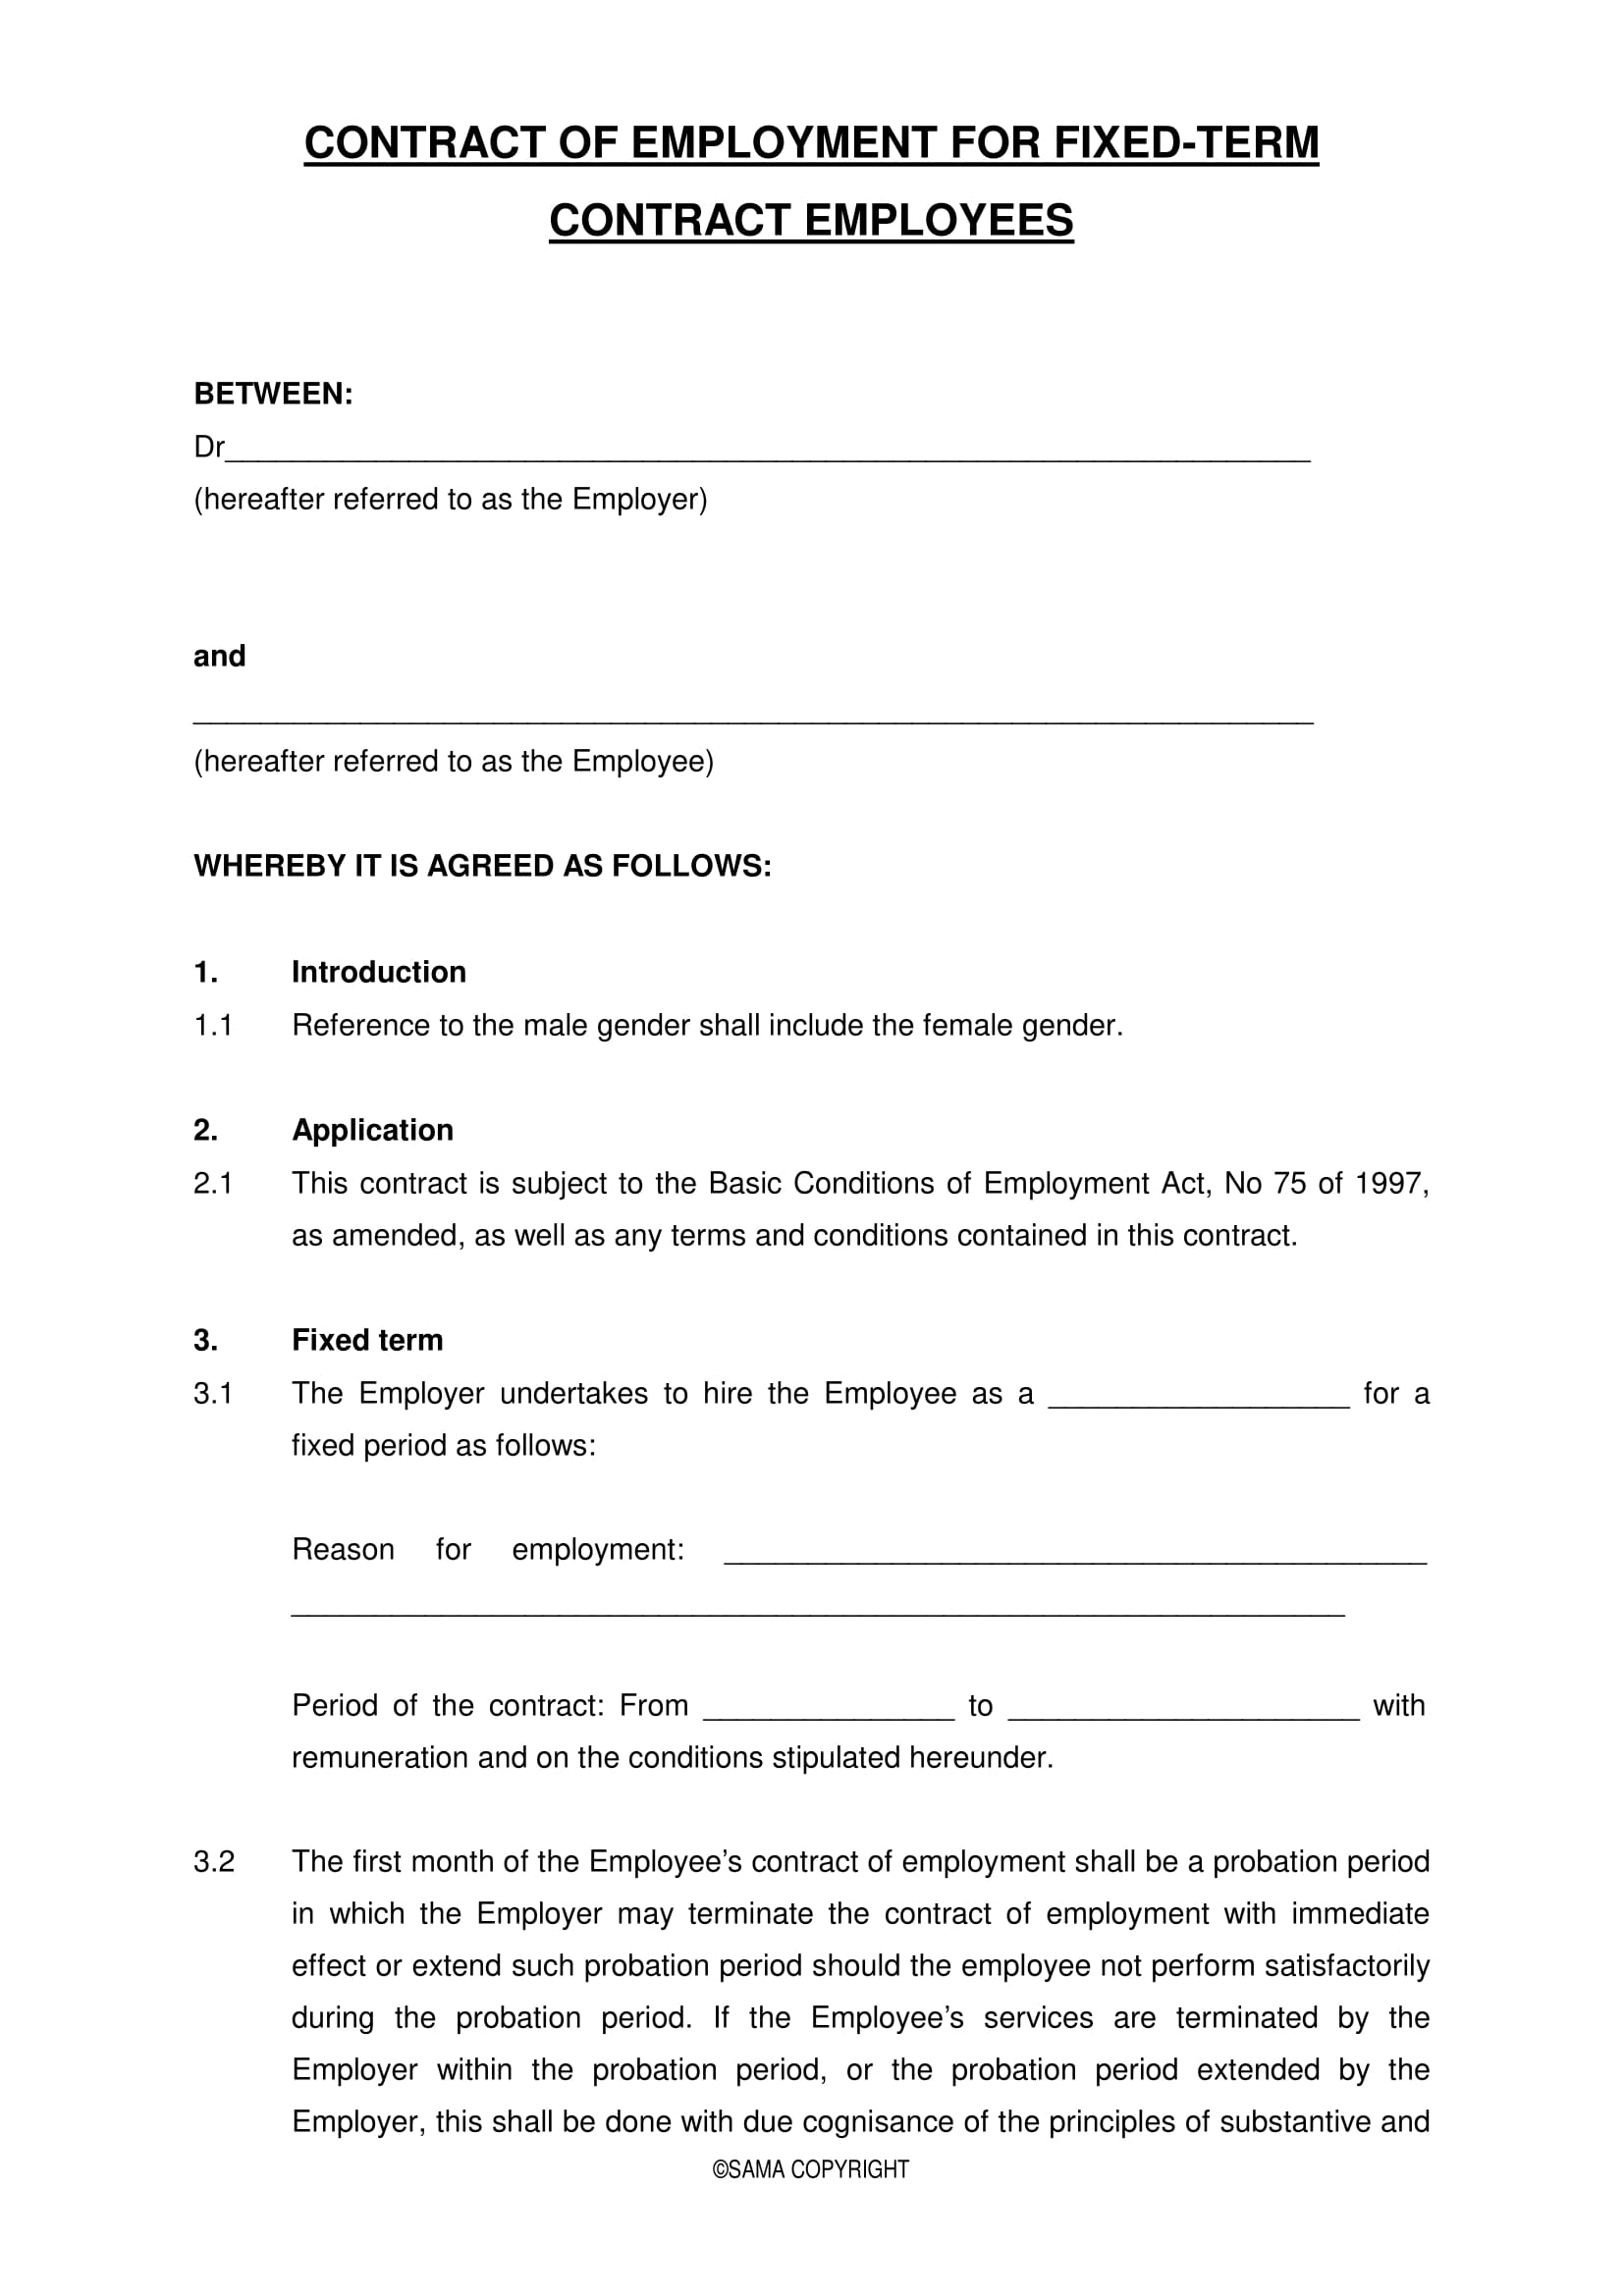 sample of an agreement contract